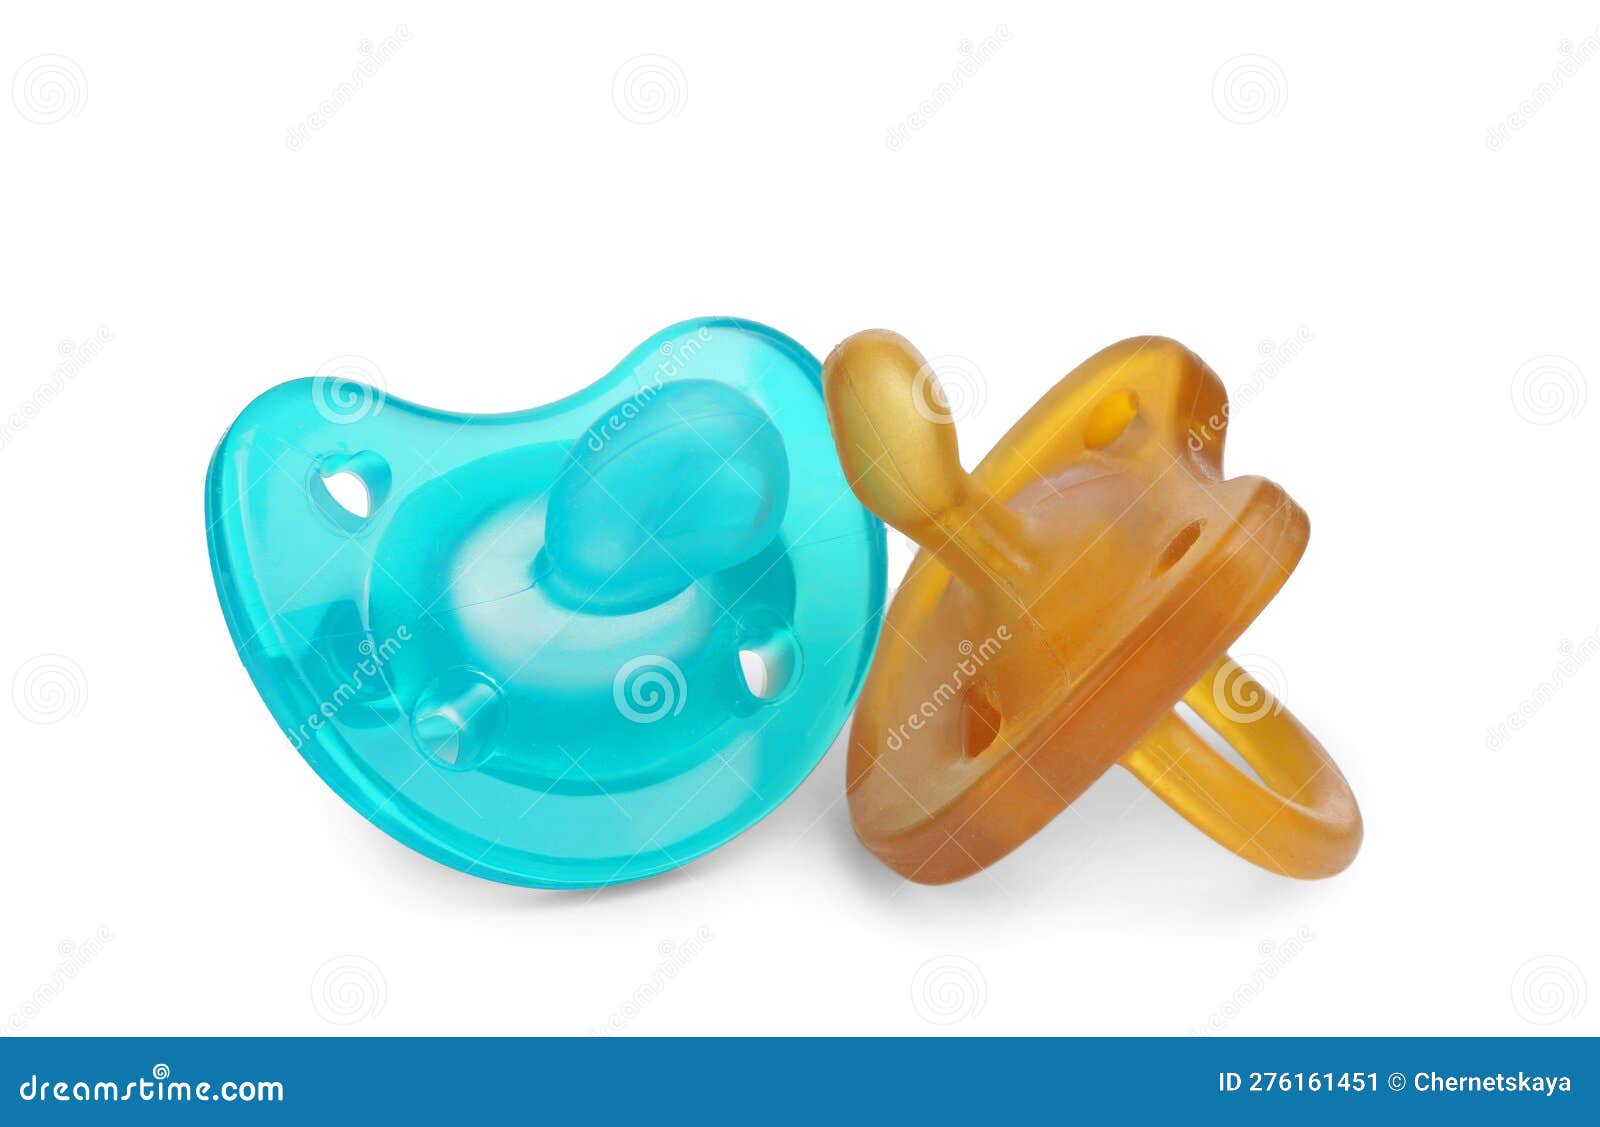 New Different Baby Pacifiers on White Background Stock Image - Image of ...